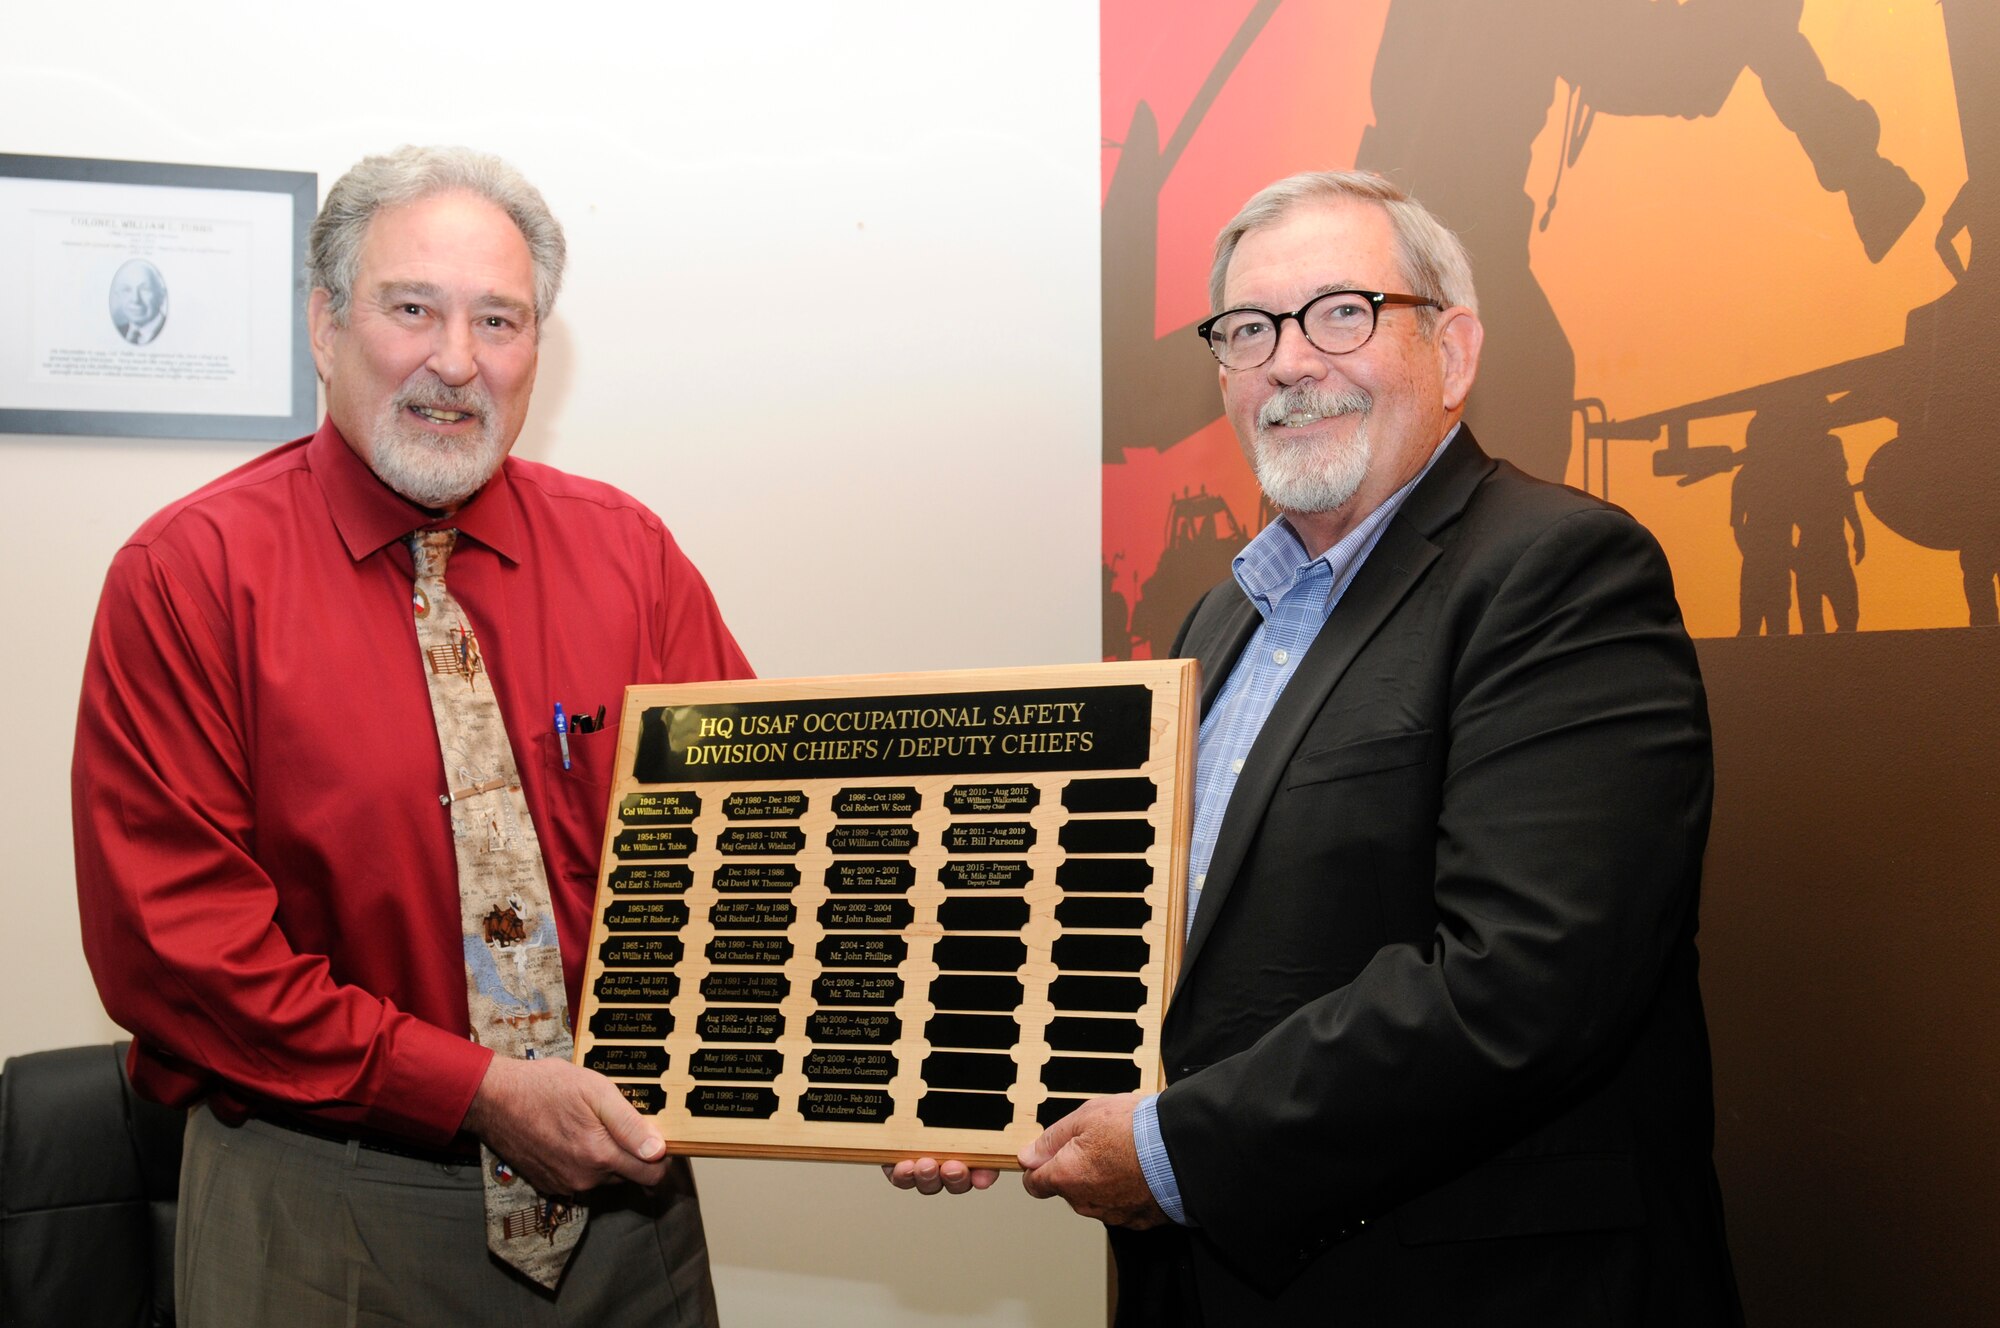 Ballard retires with more than 45 years of service. Photo of Ballard and Parsons holding plaque.